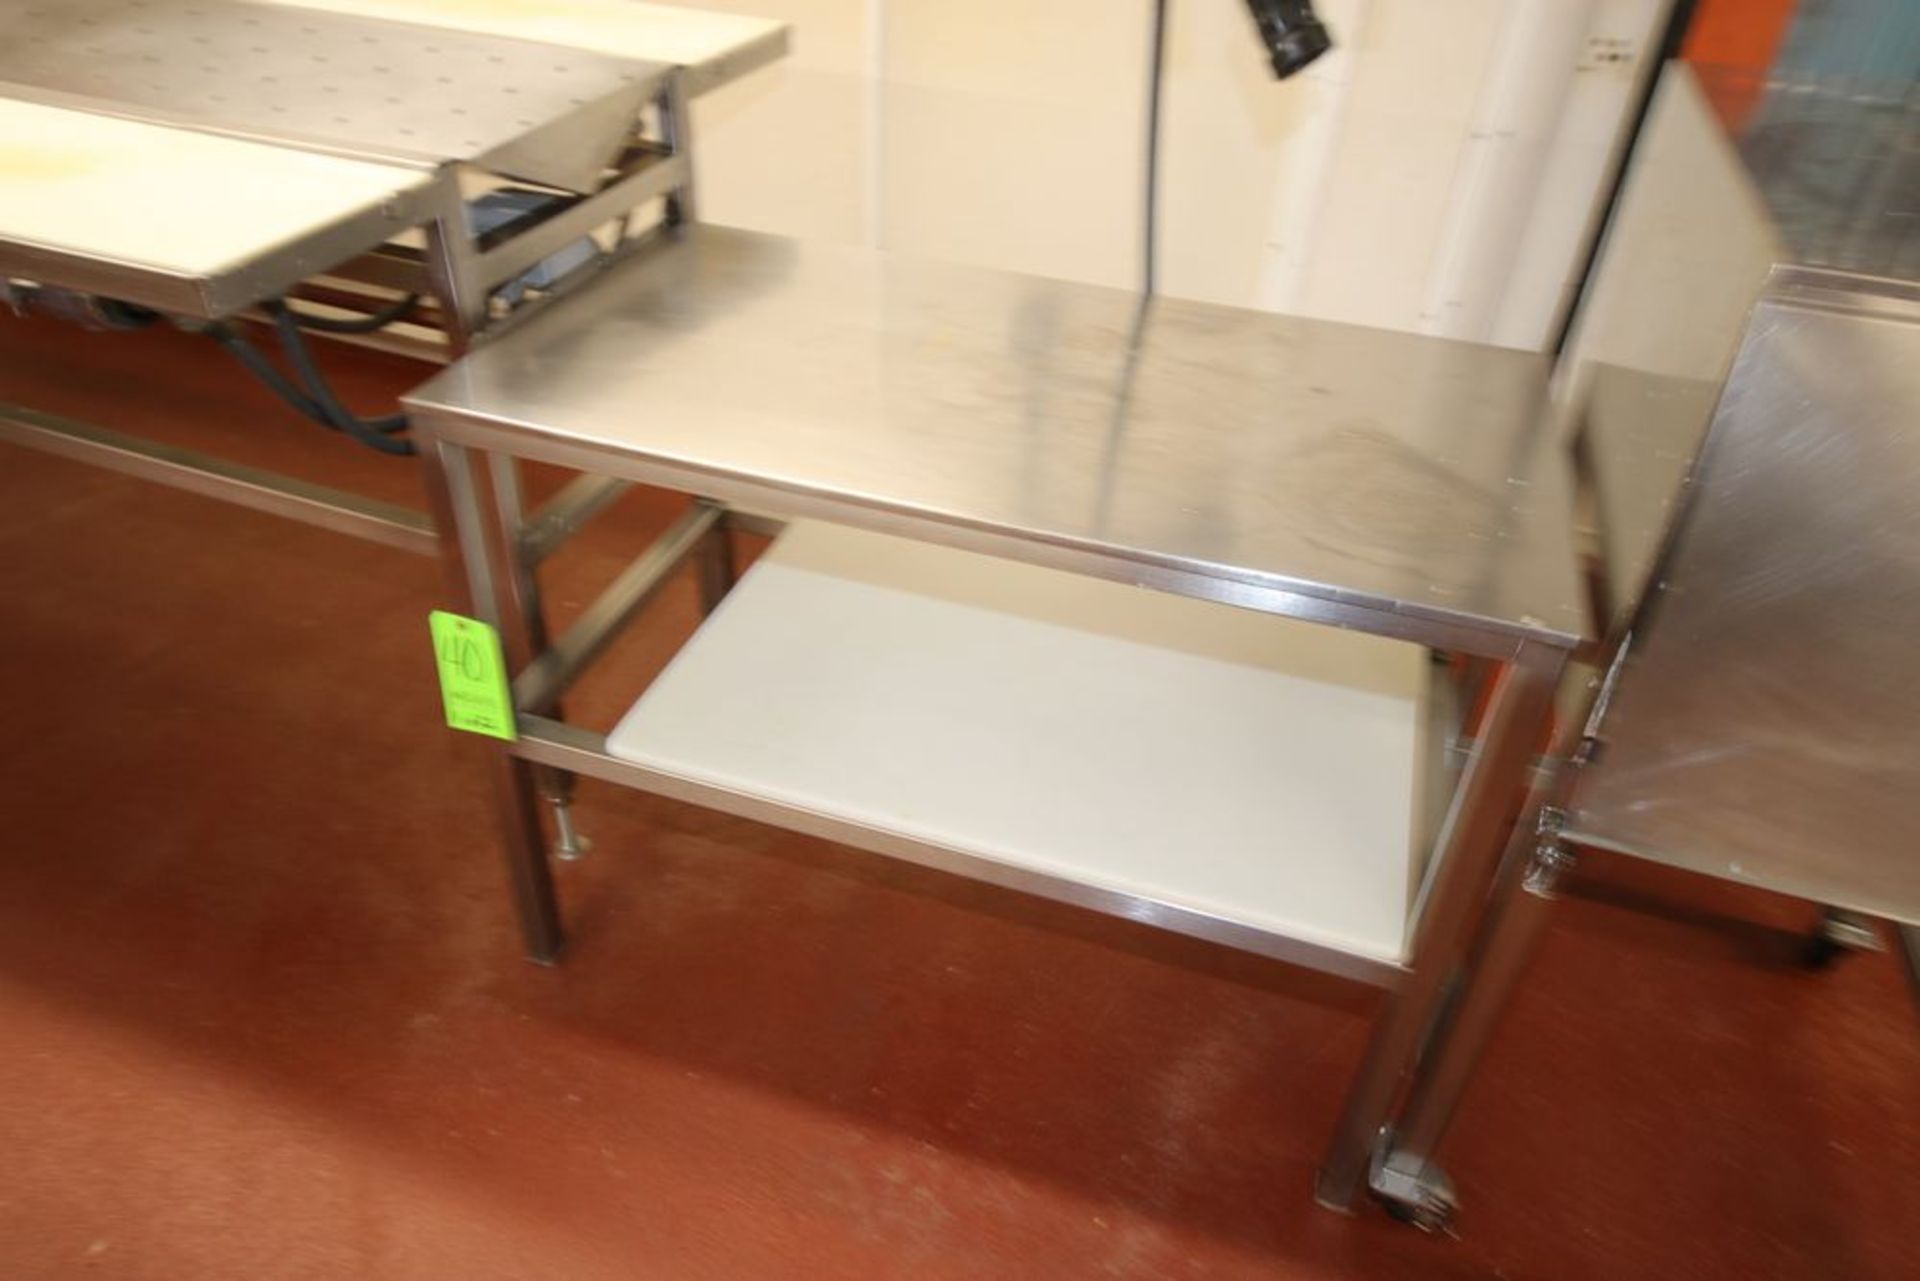 S/S Table with S/S Bottom Shelf, Overall Dims.: Aprox. 44" L x 24" W x 33" H, with Additional S/S - Image 2 of 3